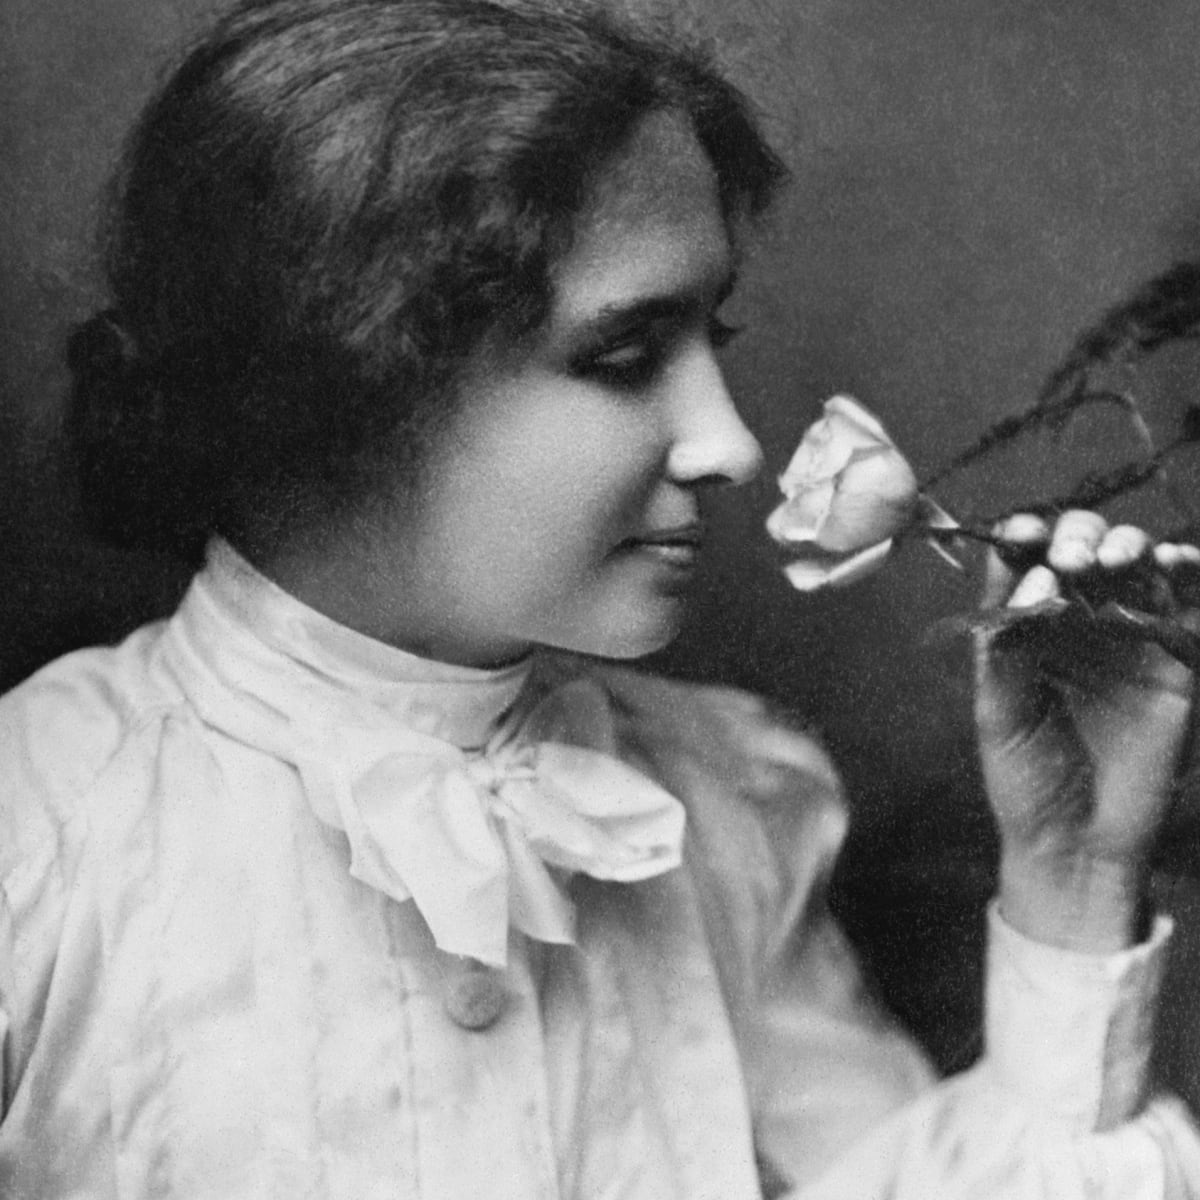 Hellen Keller American author, political activist and lecturer, she was the first deaf-blind person to earn a bachelor of arts degree. The deaf community was widely impacted by her. She travelled to 25 countties to give motivational speeches about deaf people's conditions.